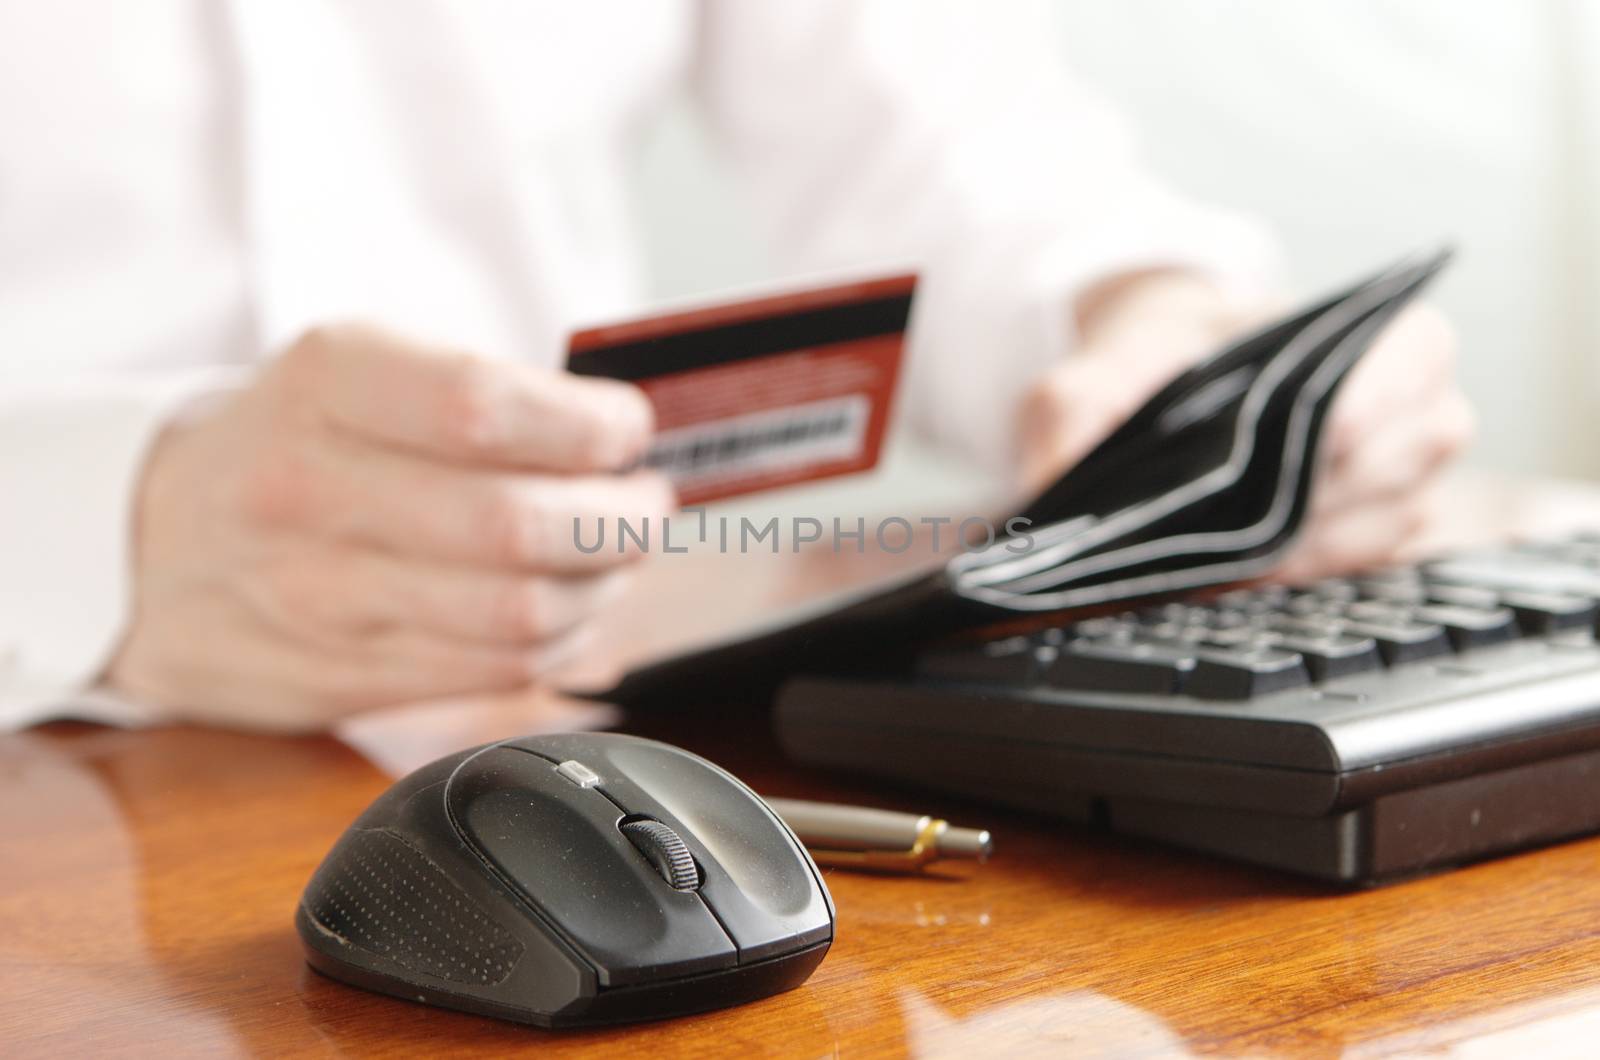 Hands of businessman with a purse and a bank card on the computer keyboard